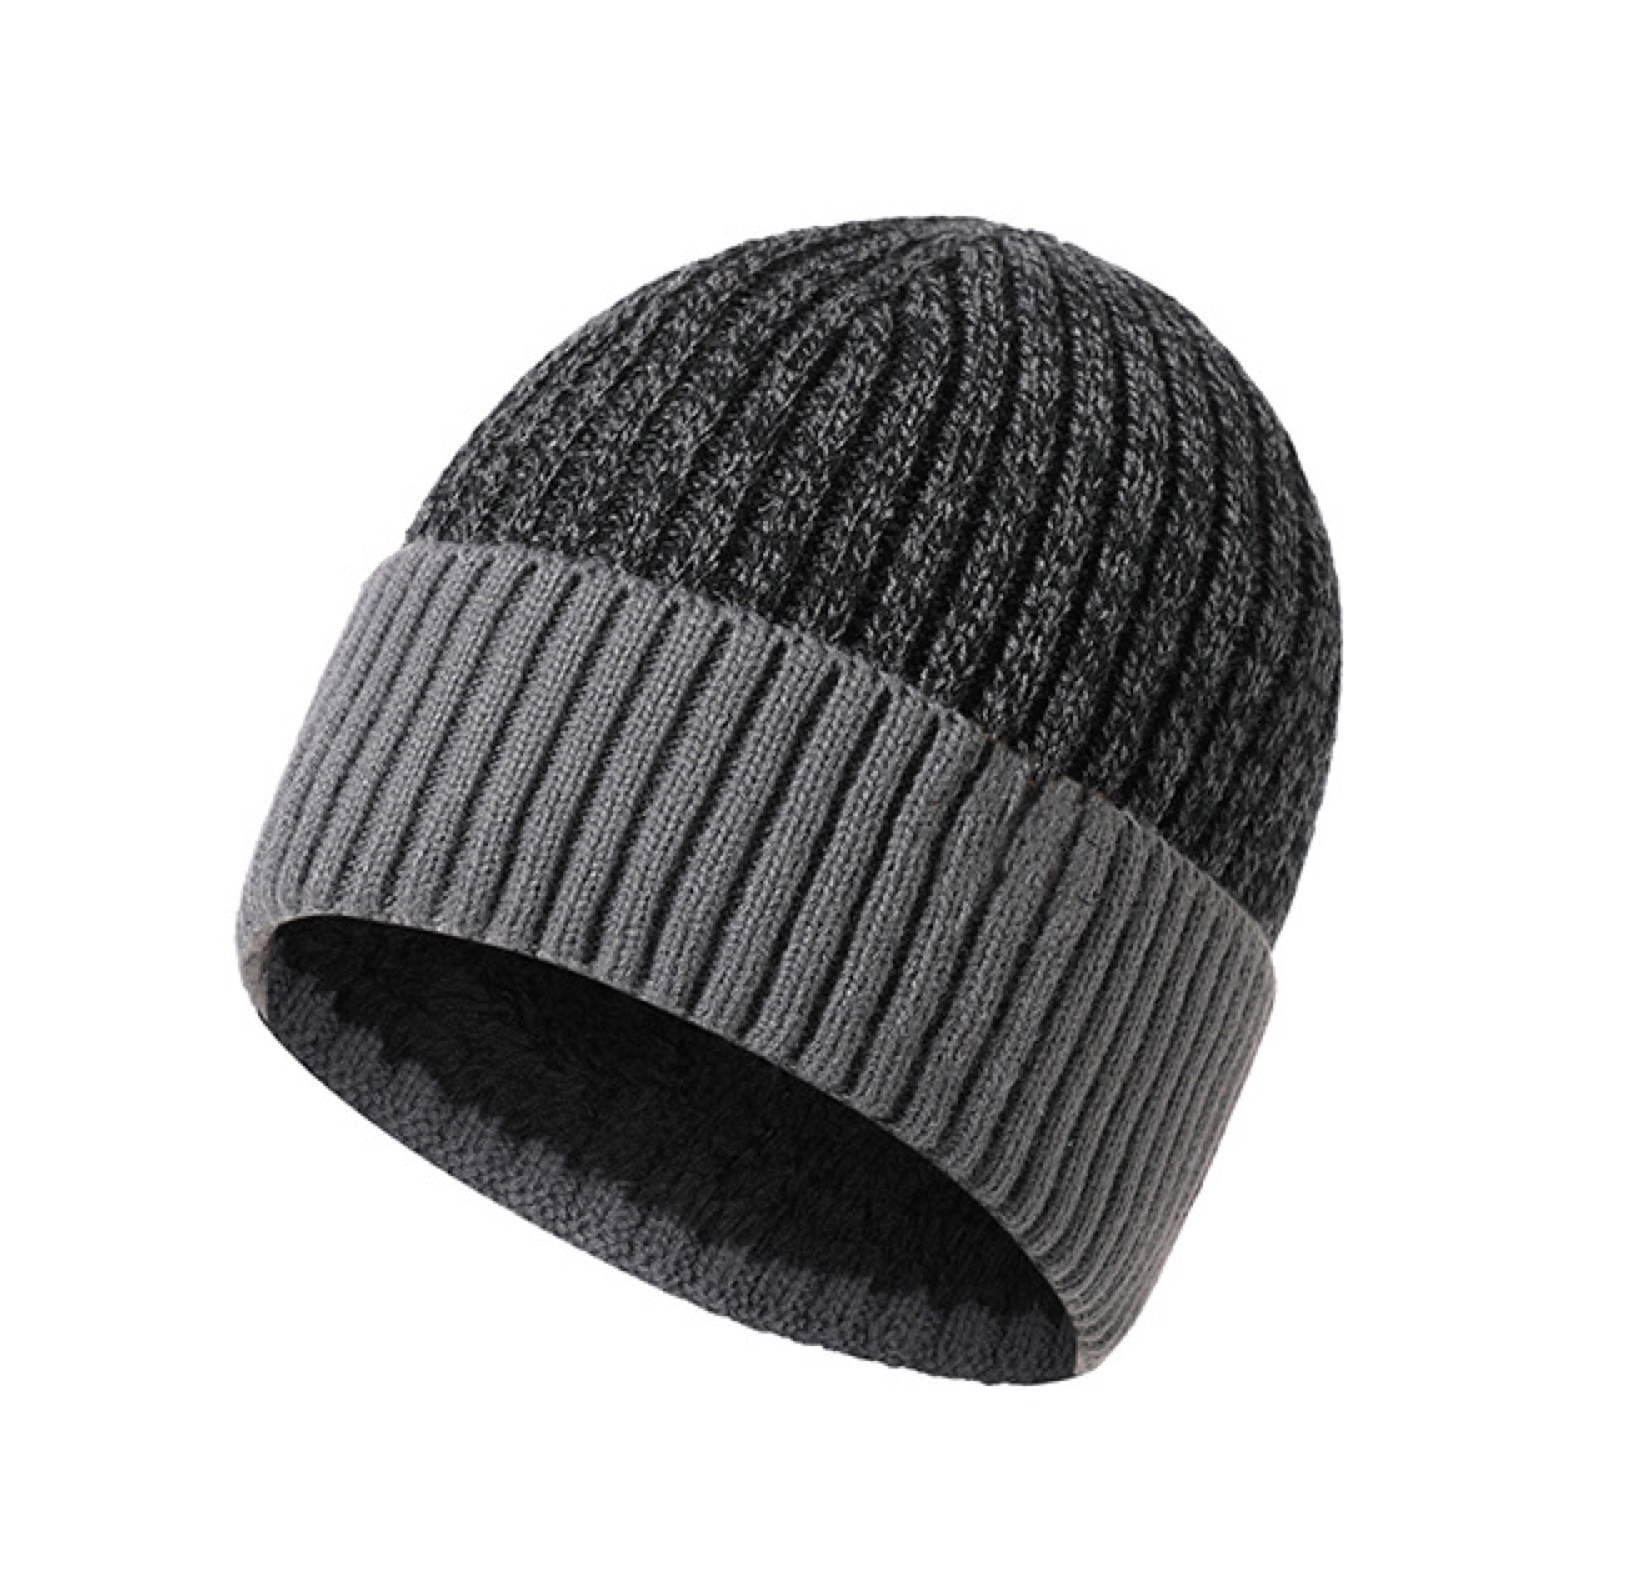 Beanie, Knit Cuffed, Winter Hat, Double Layer, Hat for Men and Women - Grey-1